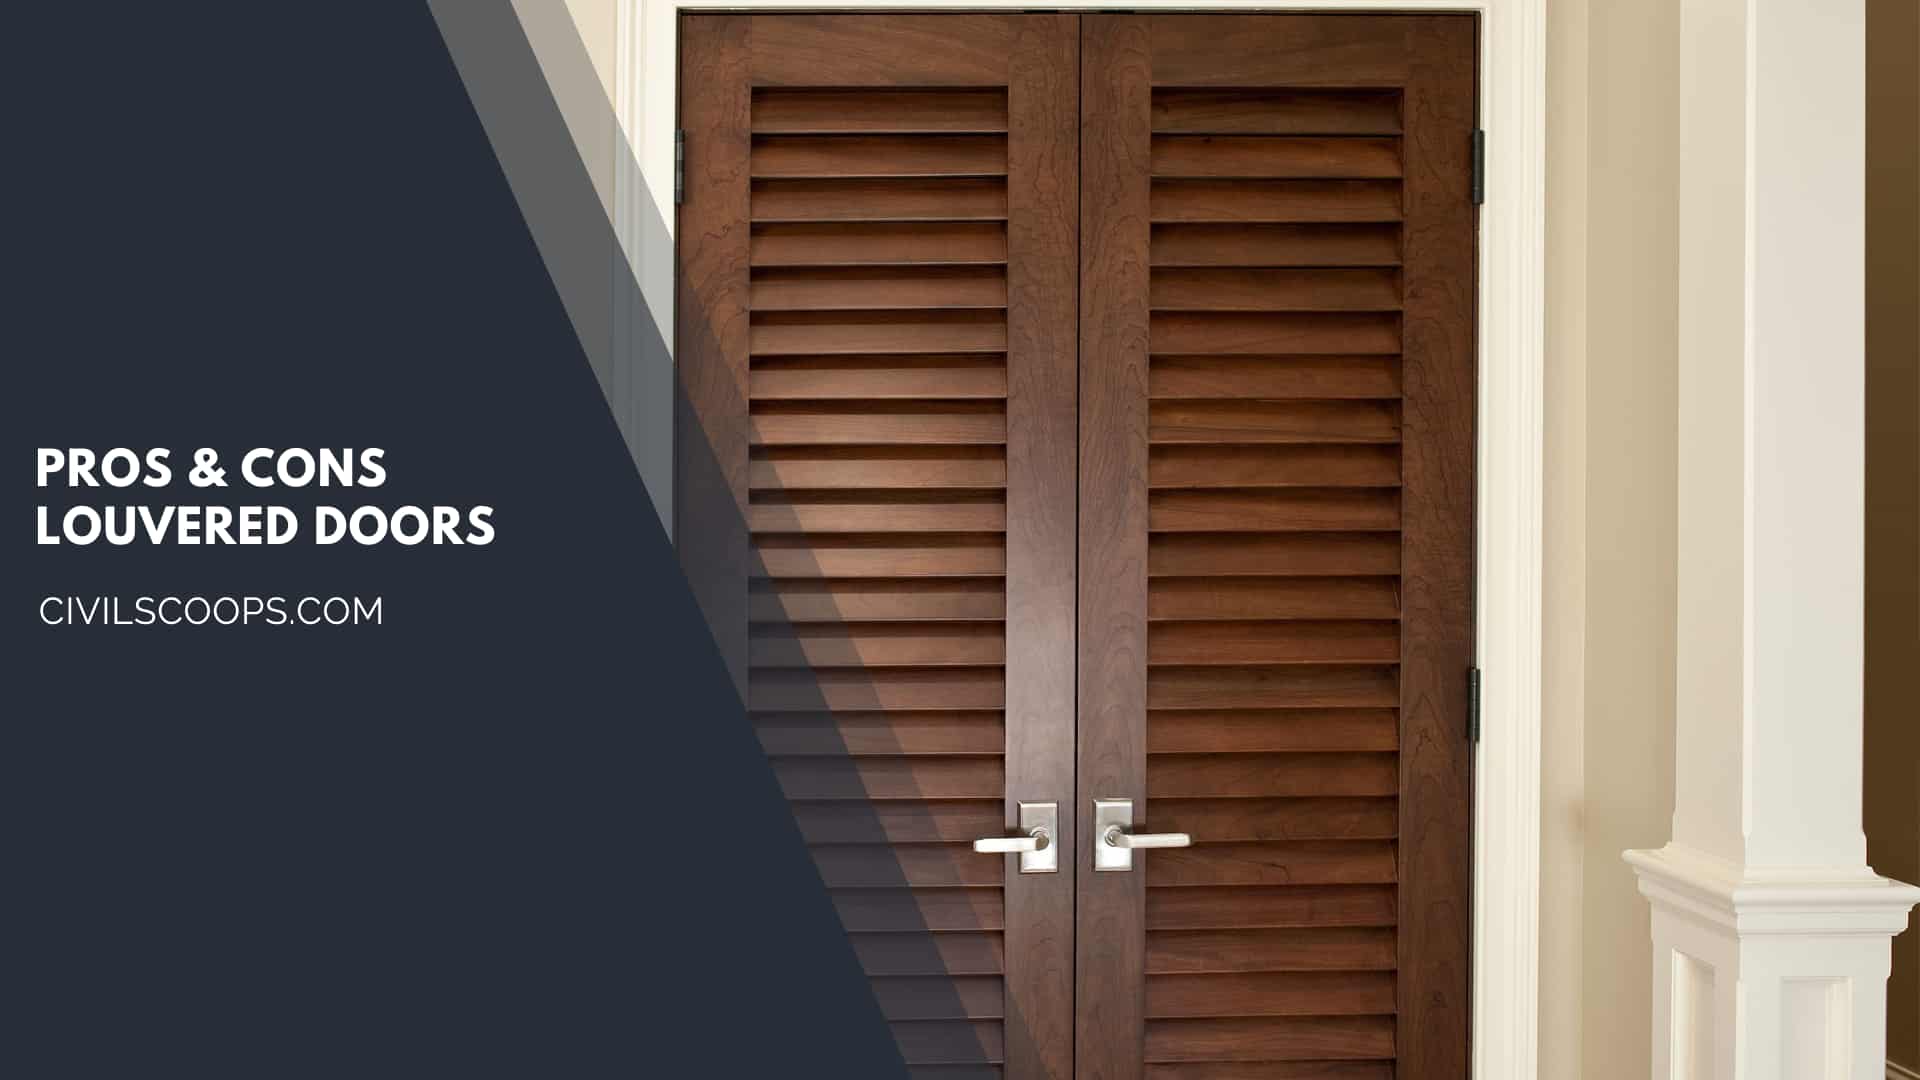 Pros & Cons Louvered Doors